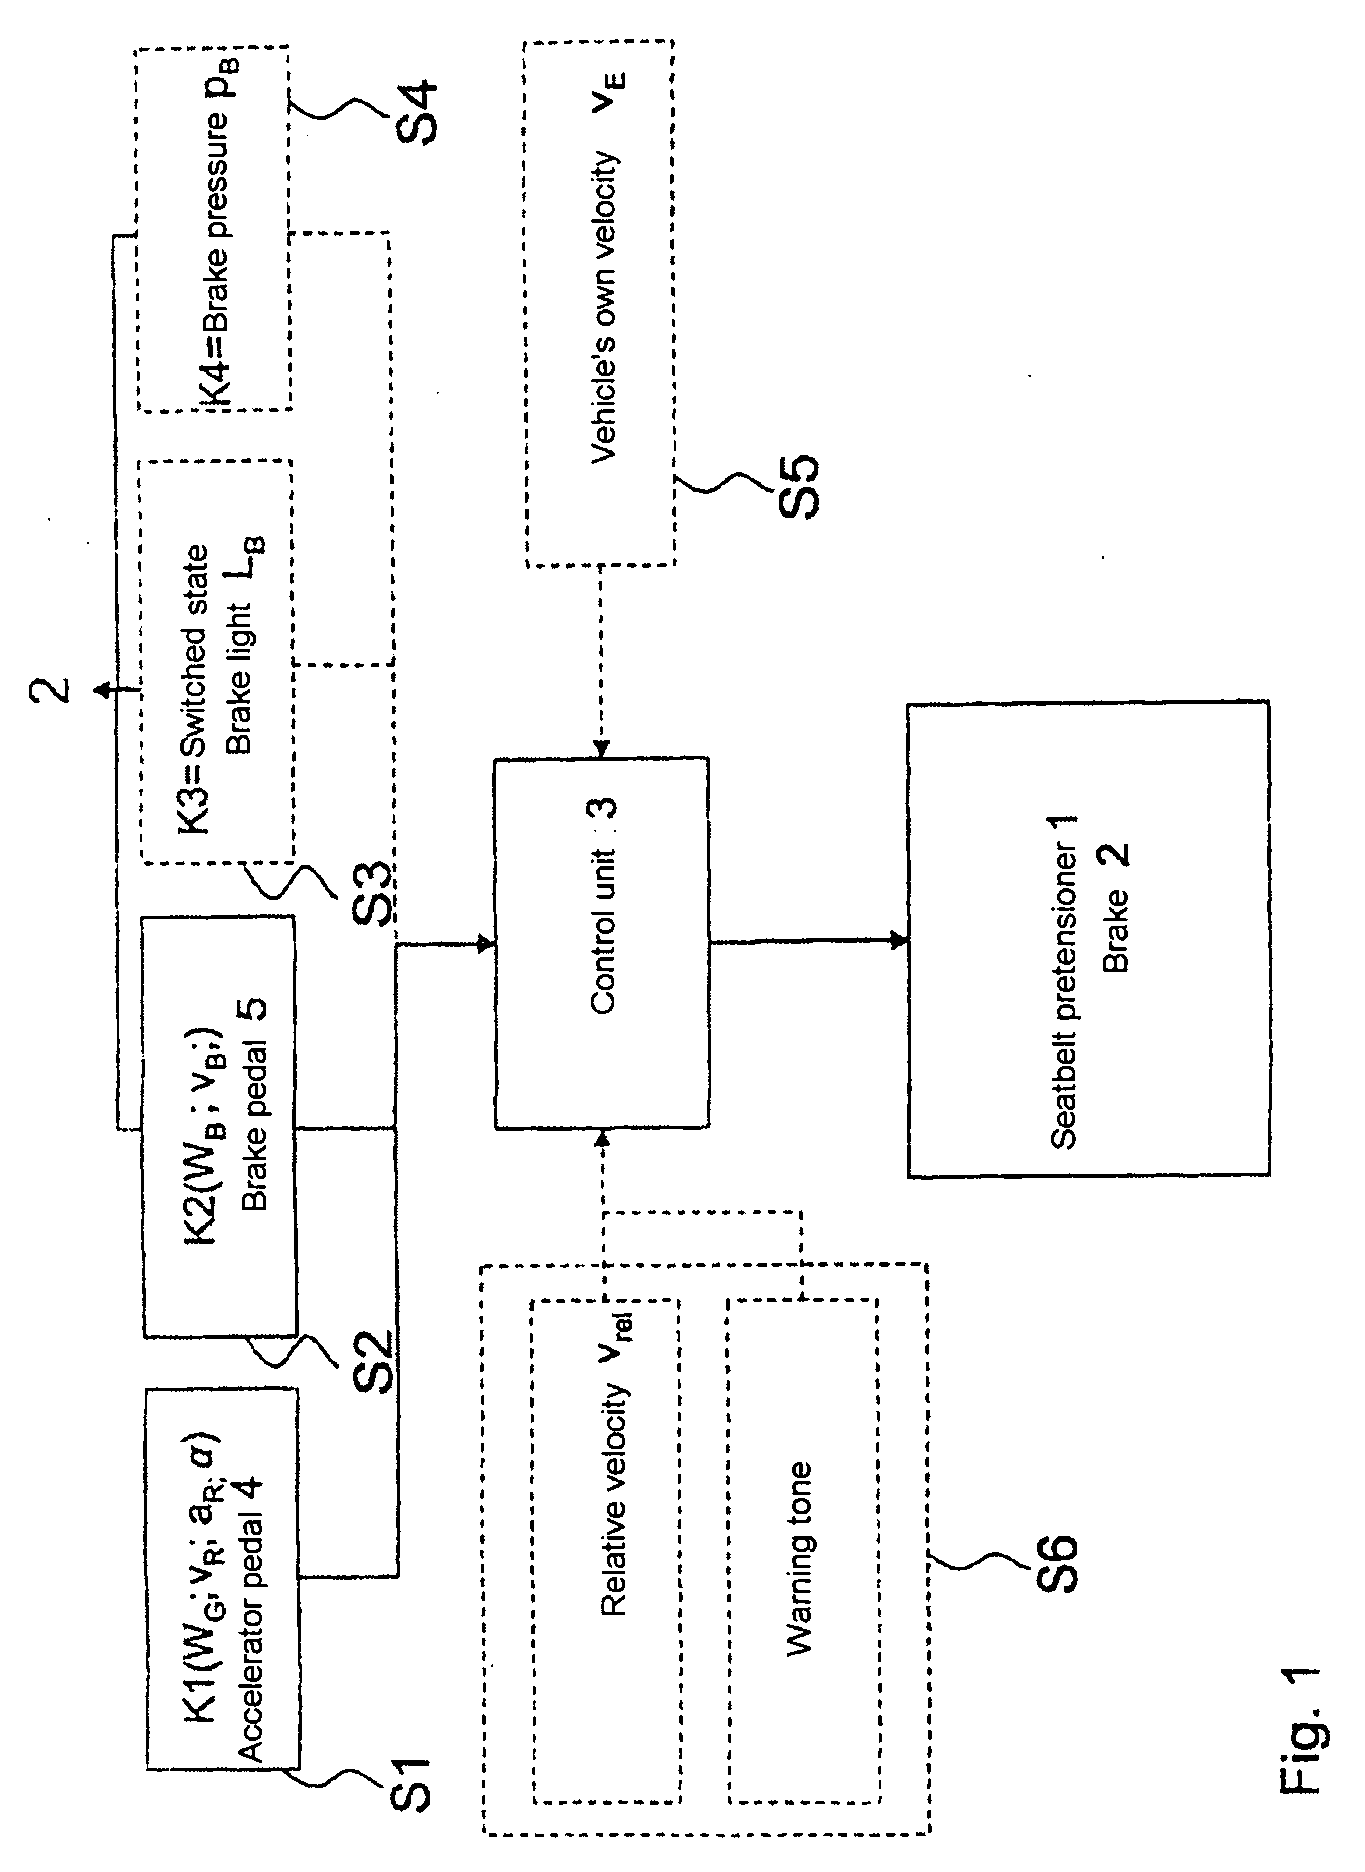 Method and Device for Control of a Reversible Belt Tensioner